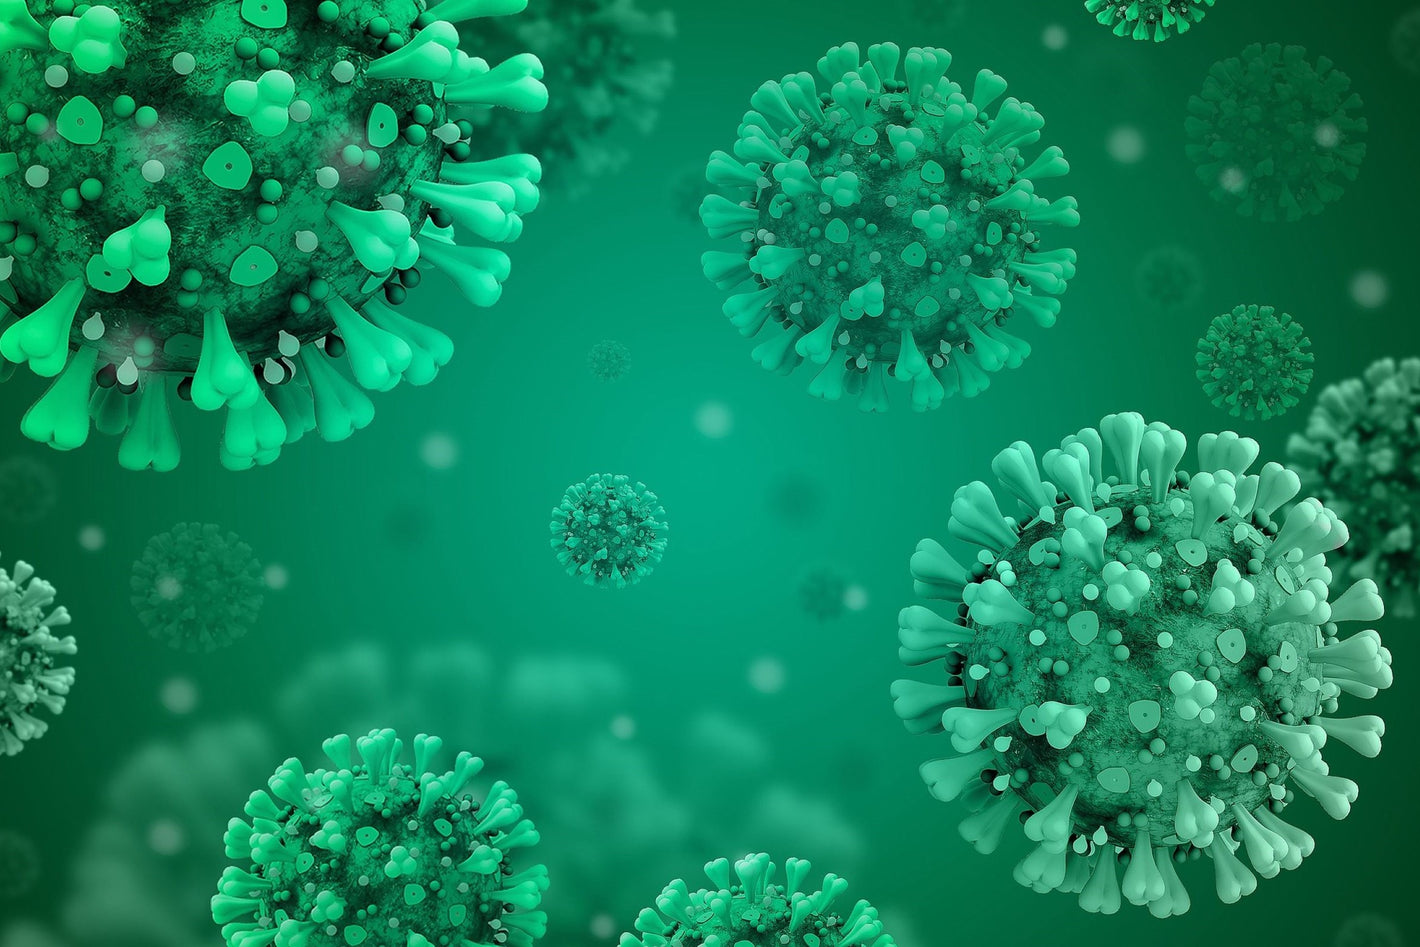 Green virus particles under the microscope for vaccine development under GMP conditions